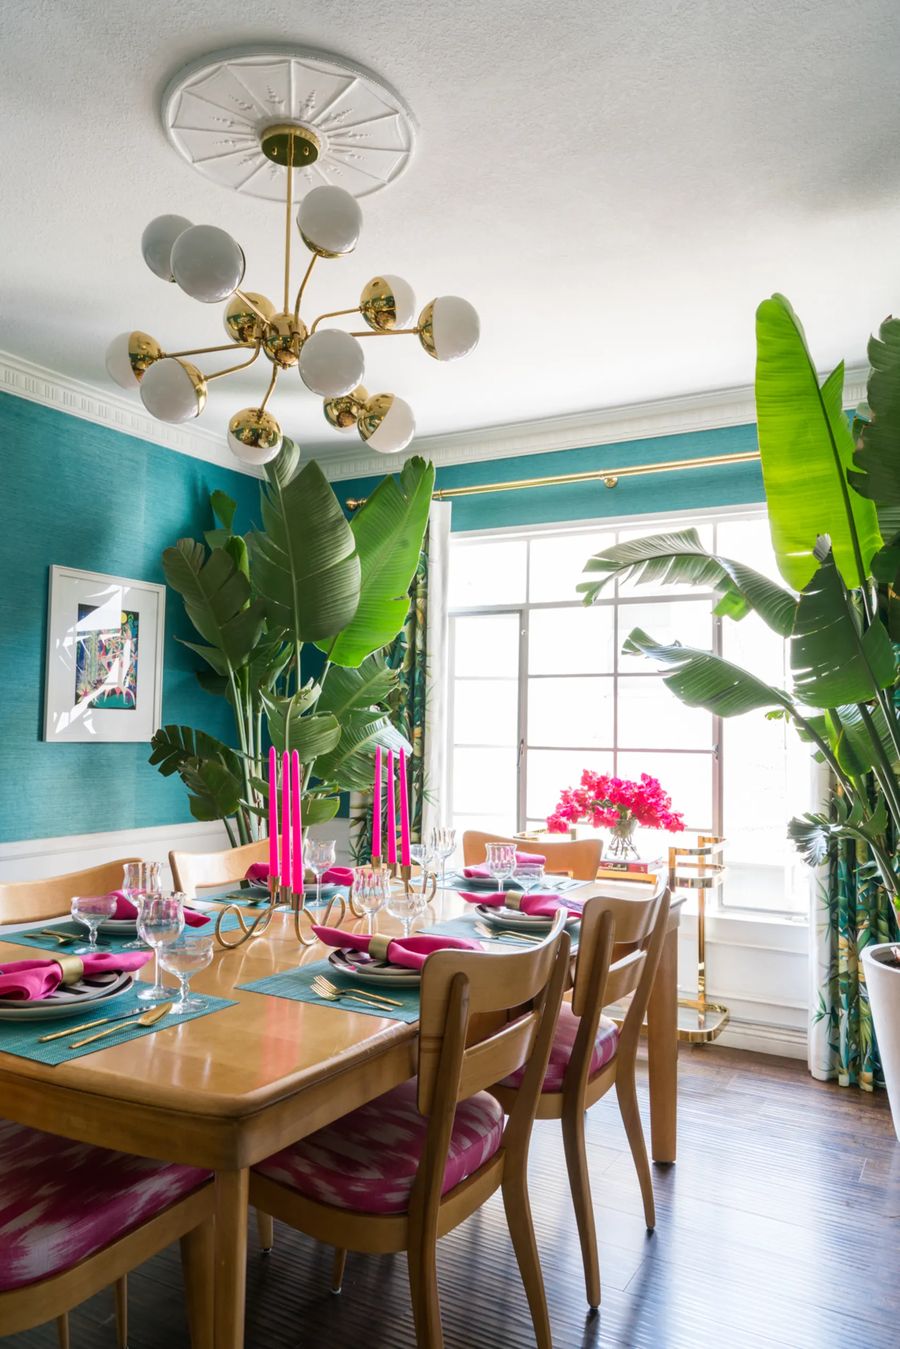 10 Best Tropical Dining Room Decor Ideas, Tropical Dining Room Designs